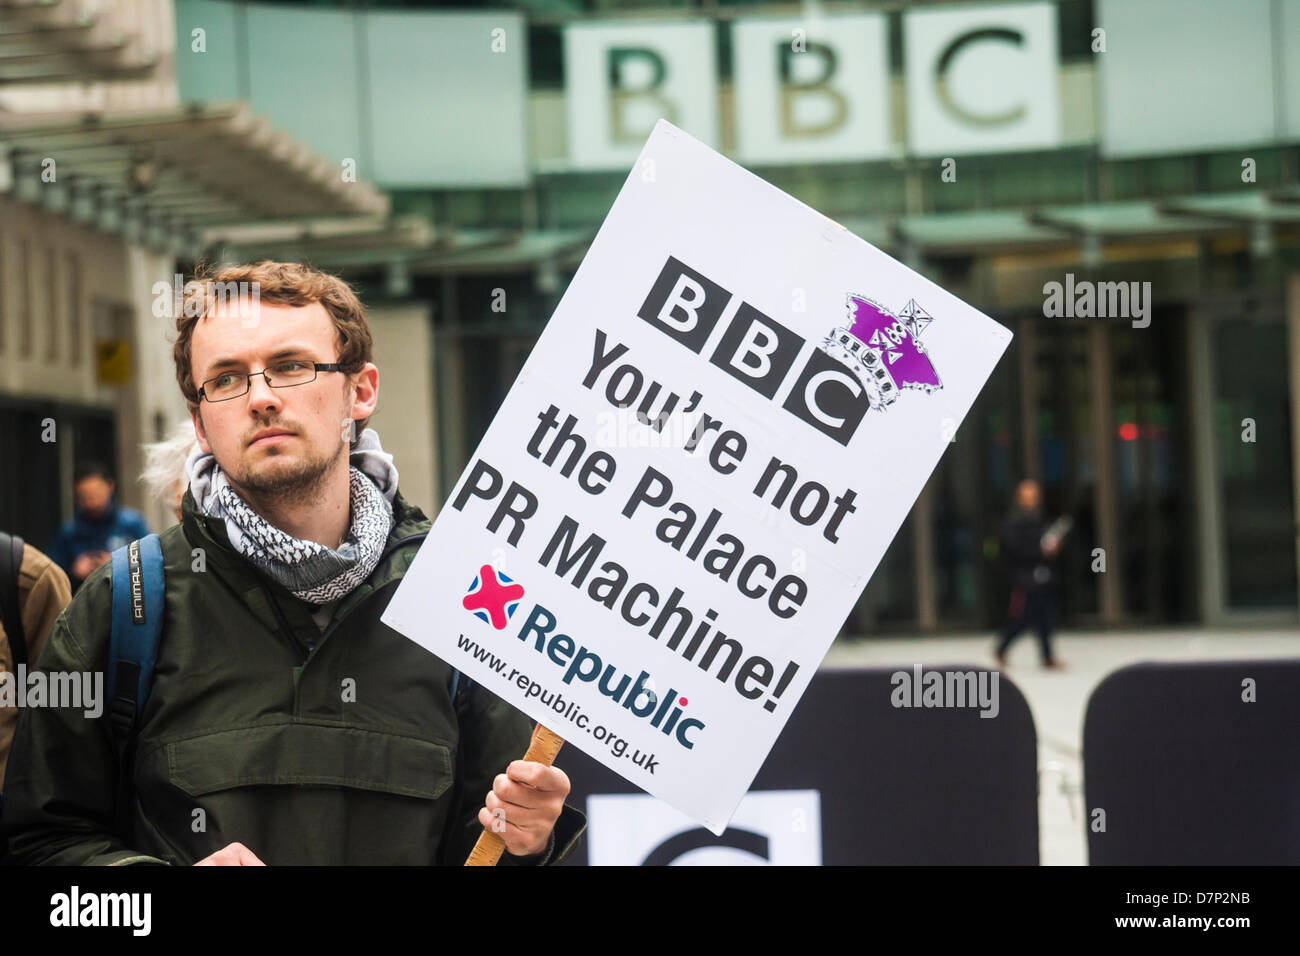 London, UK. 11th May 2013. A Republic protester outside the BBC reminds them that they are not the Palace PR machine. Credit: Paul Davey/Alamy Live News Stock Photo